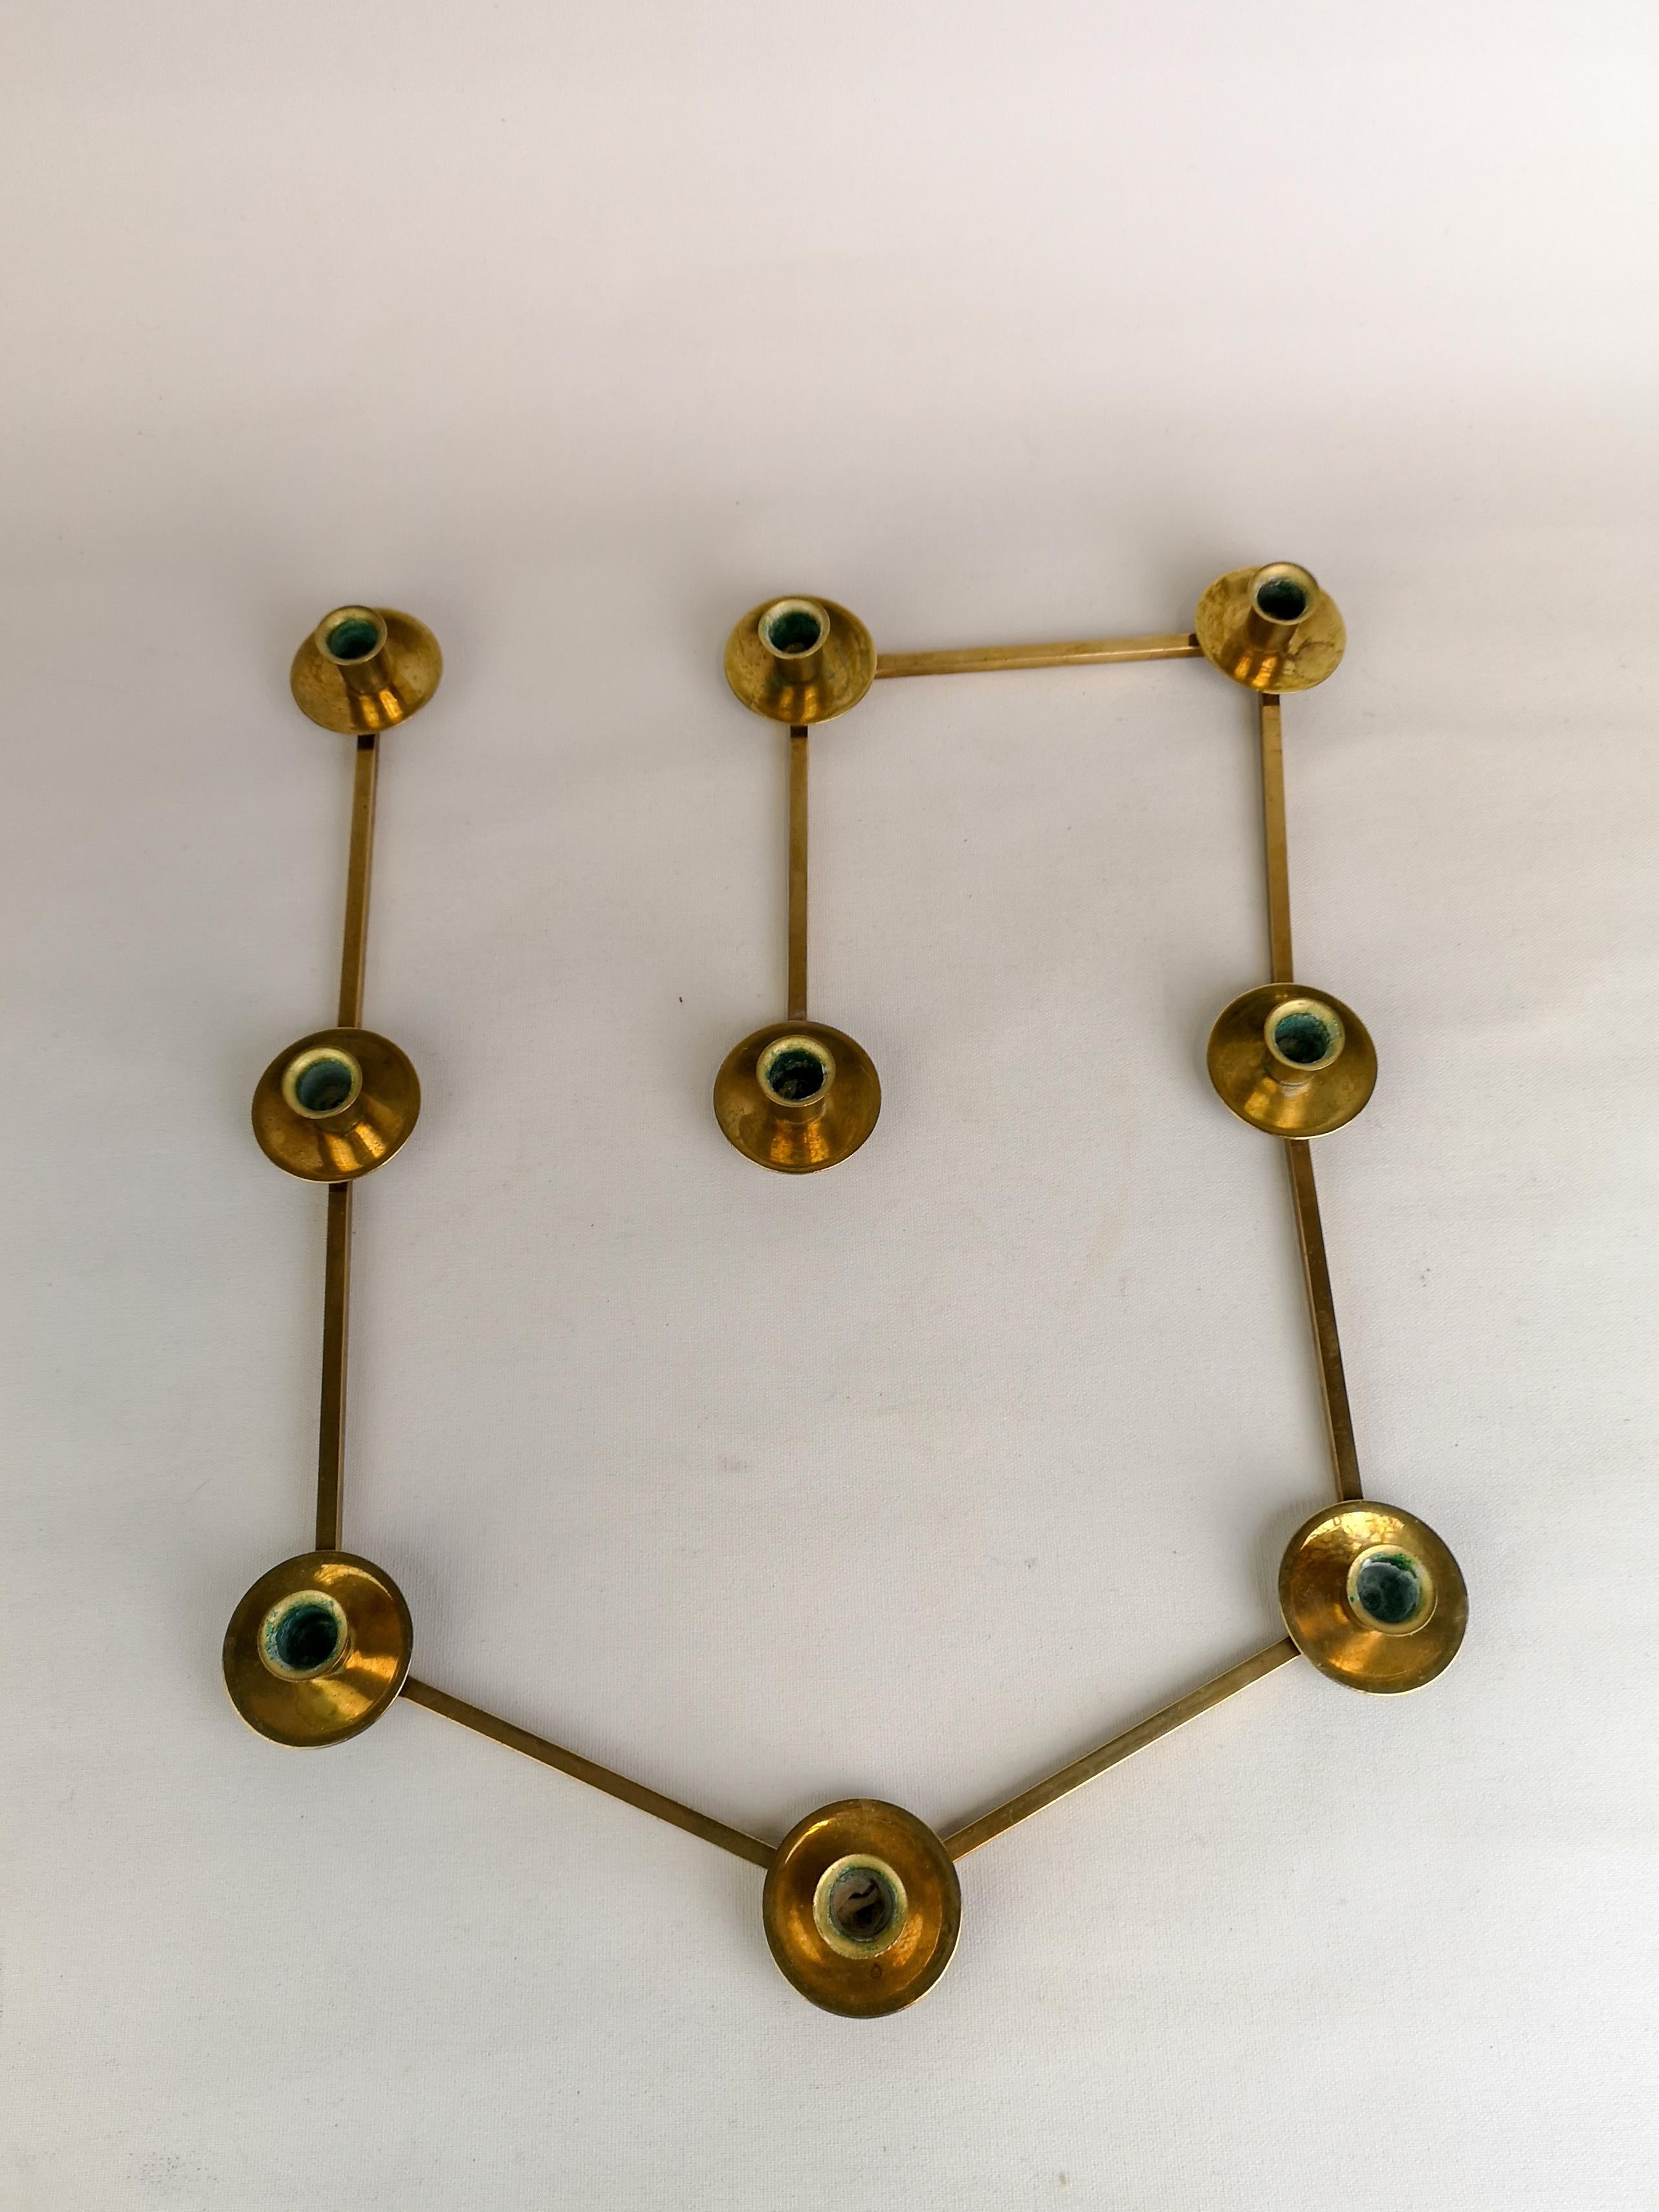 This candleholder in brass has endless possibilities in your creativity. Made in Sweden during the 1950s.

Good fair condition.

